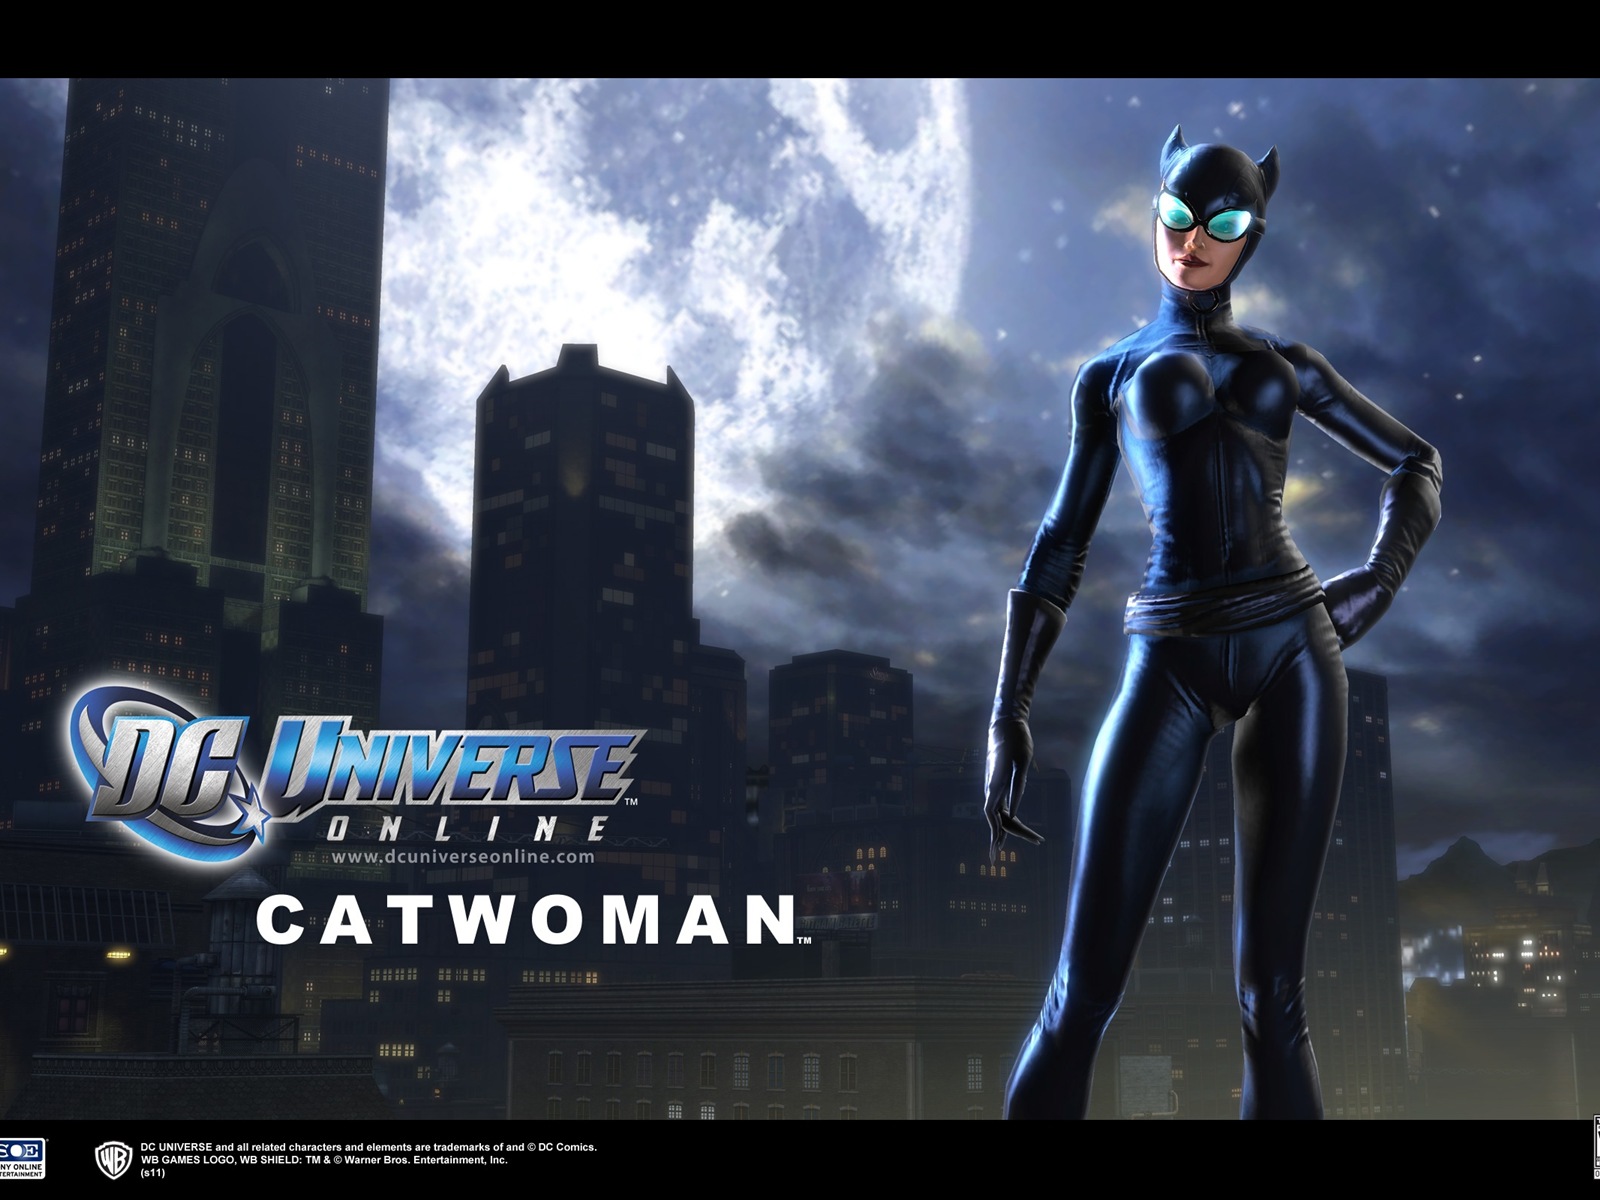 DC Universe Online HD game wallpapers #14 - 1600x1200